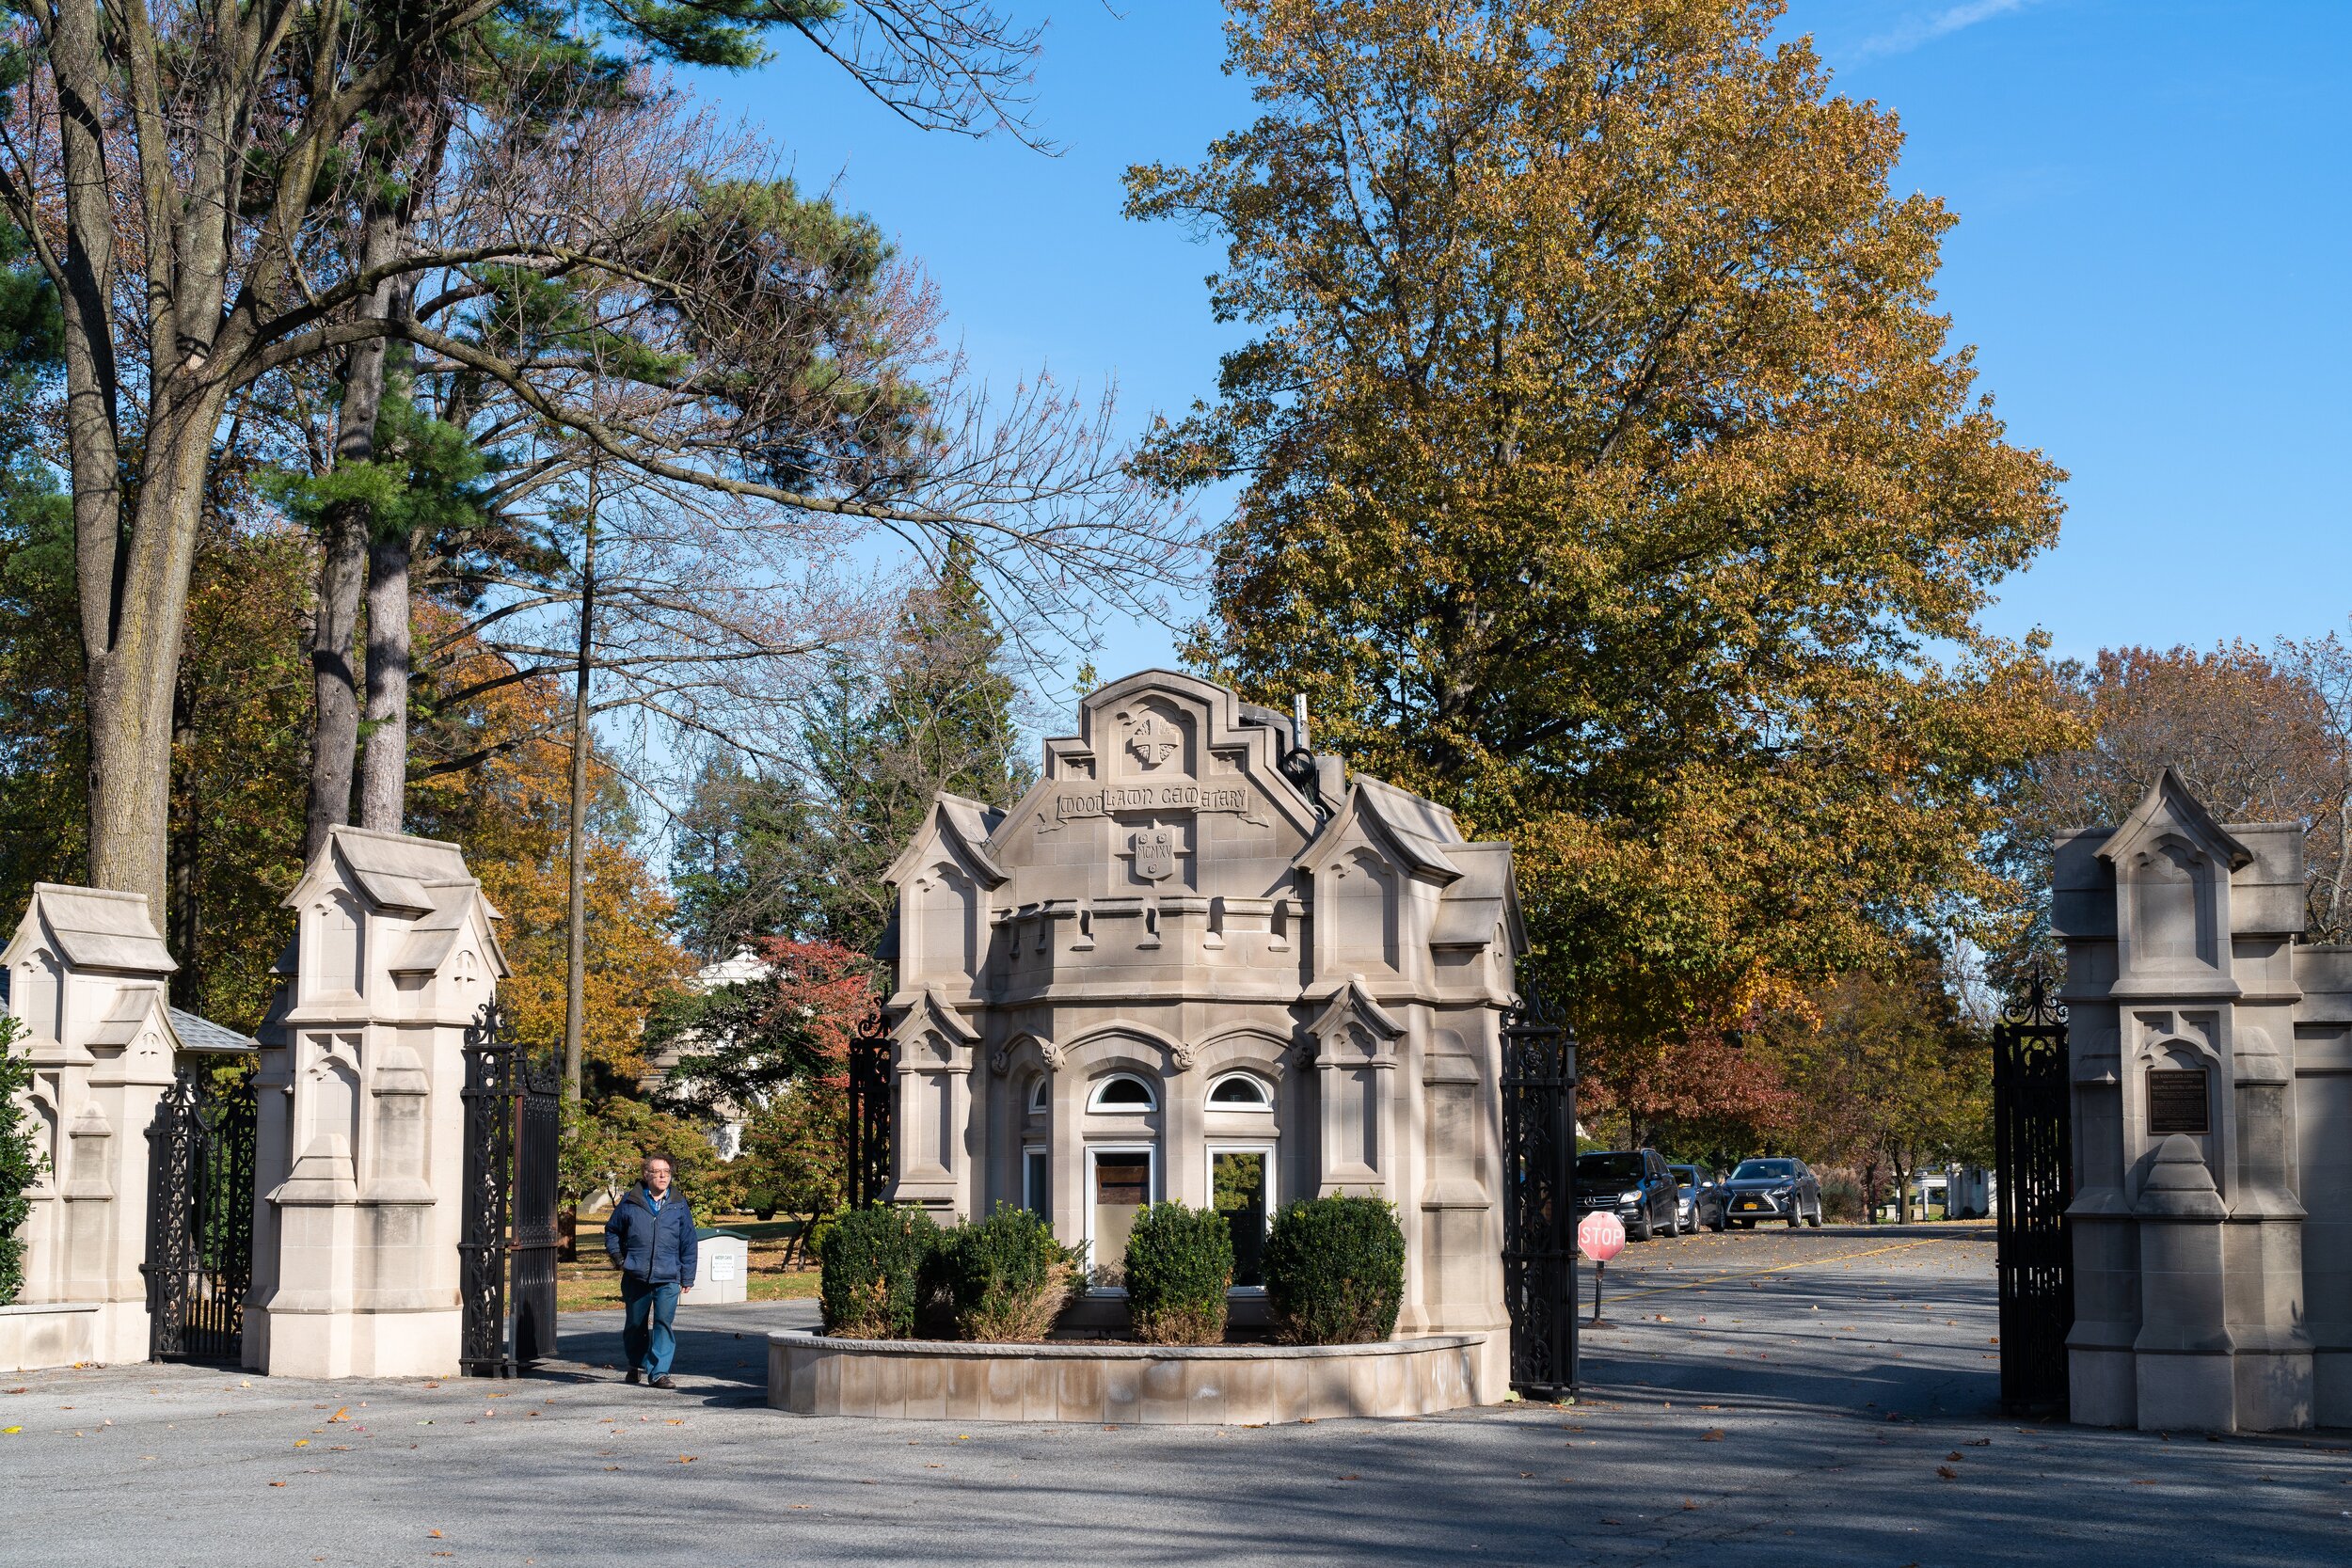   Woodlawn Cemetery in the Bronx is a National Historic Landmark and one of the largest cemeteries in the city.  